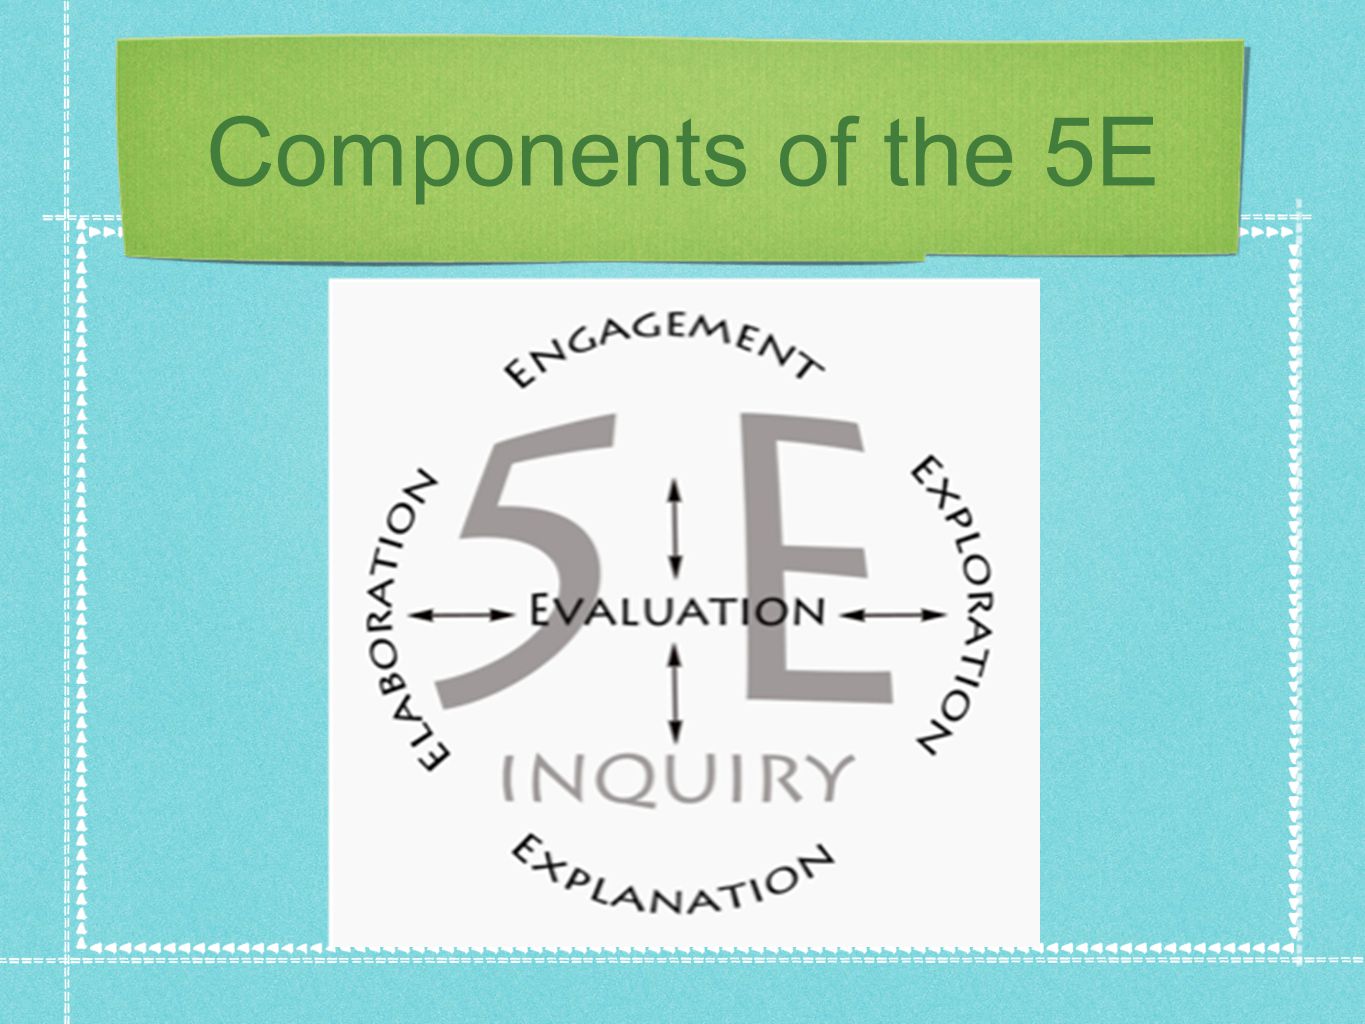 Components of the 5E